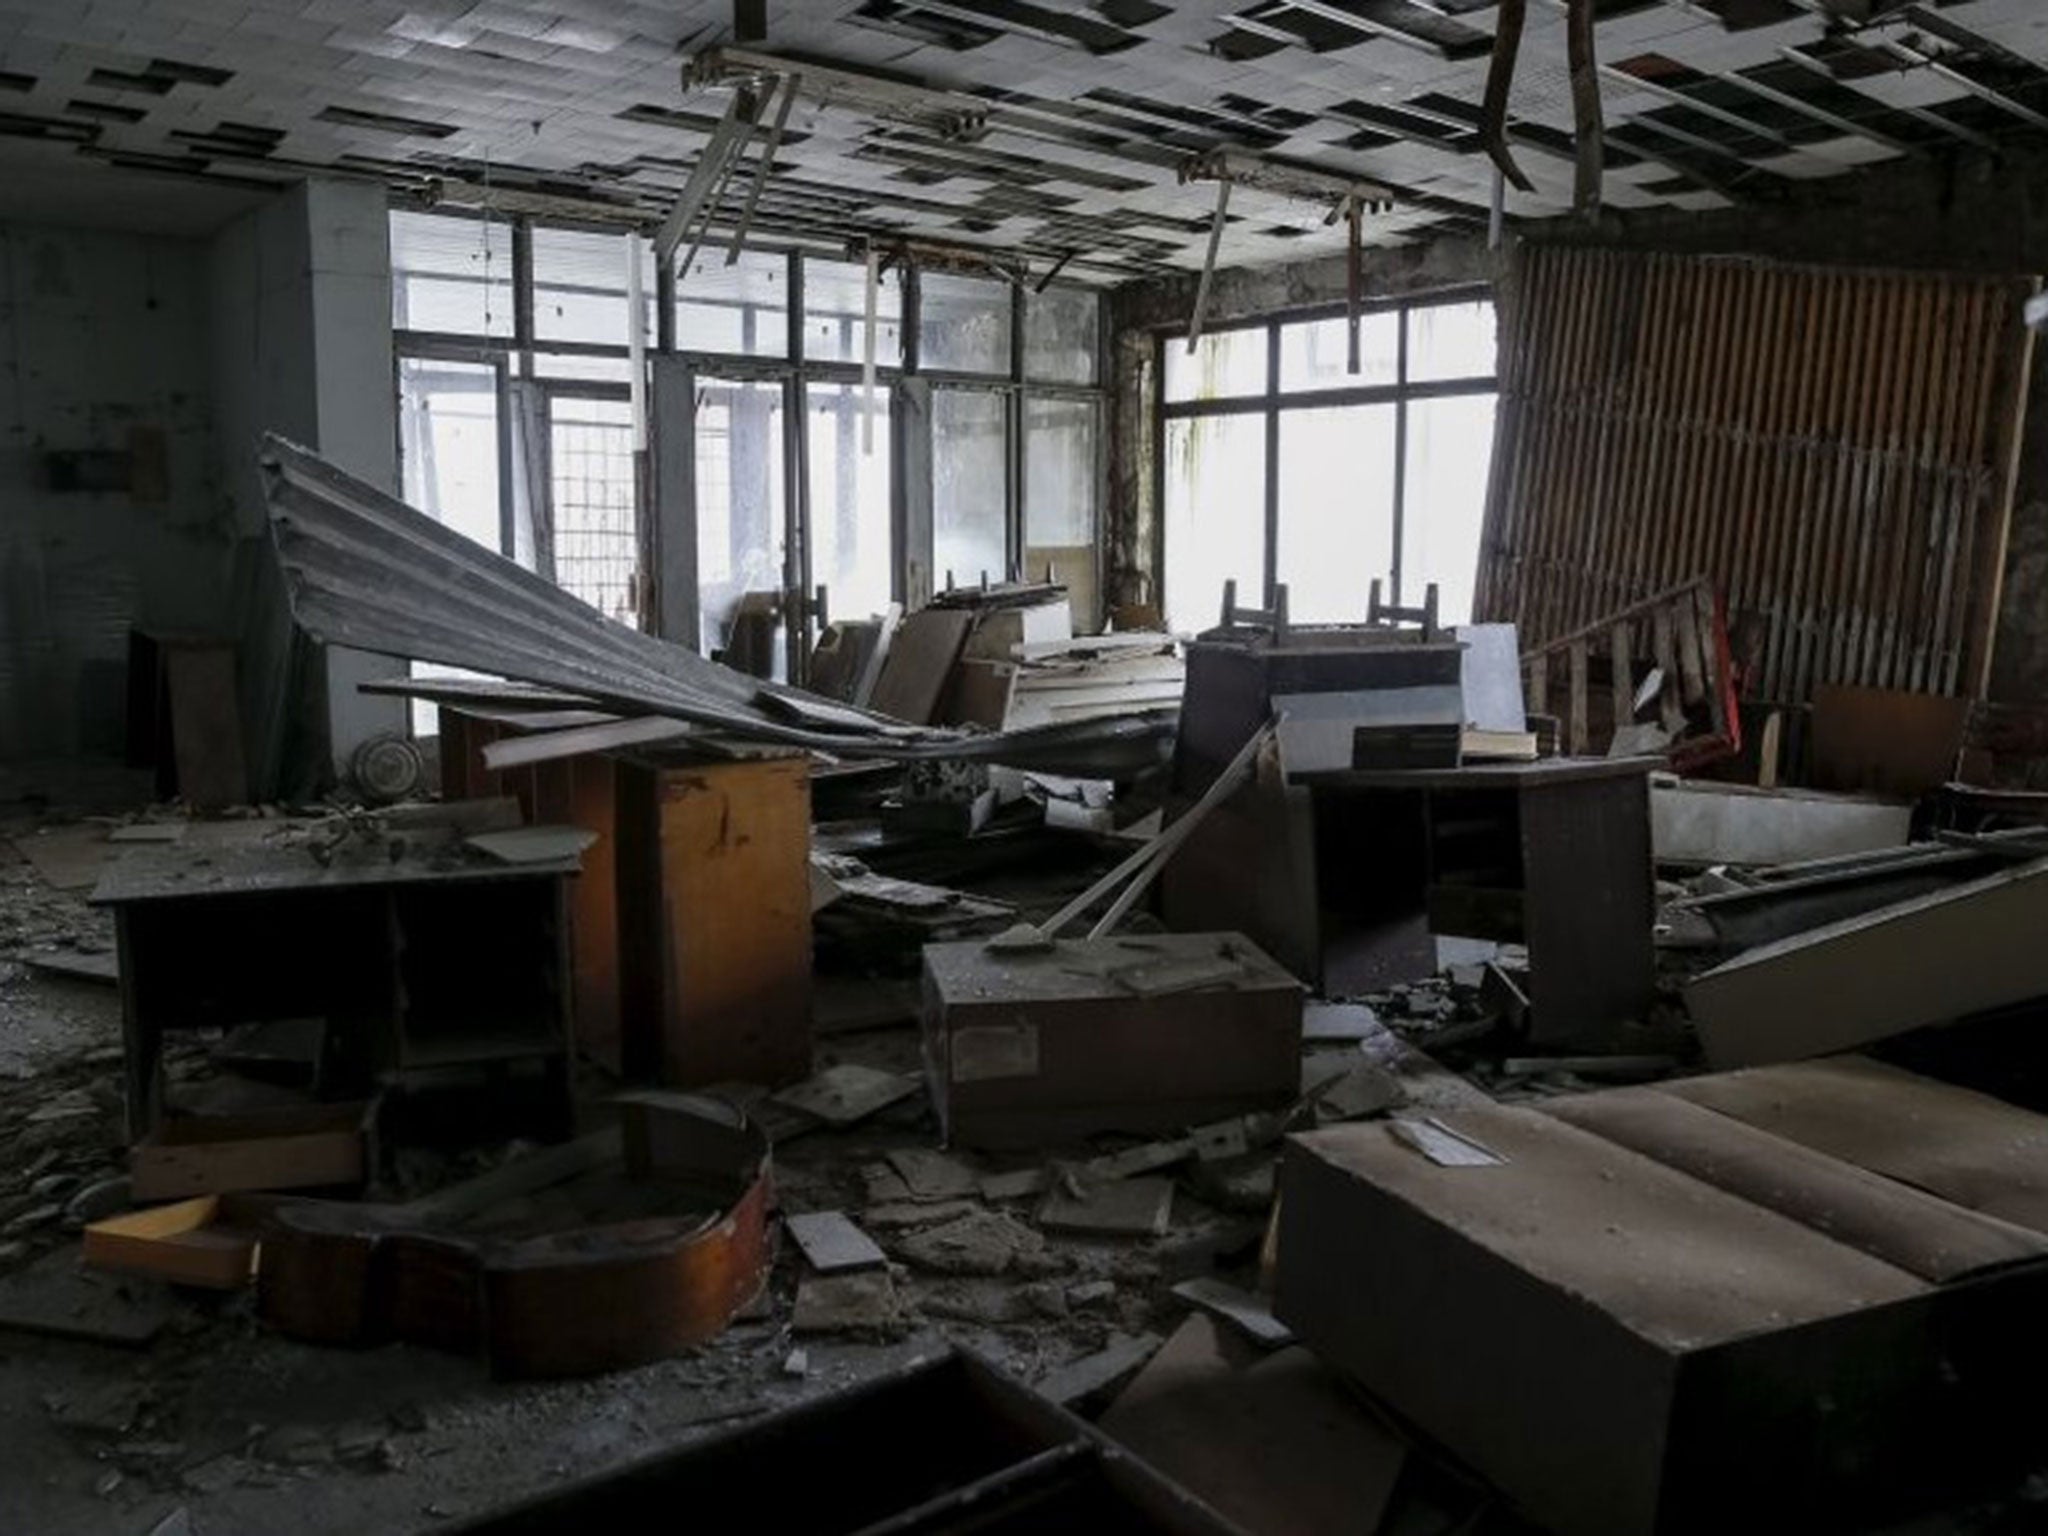 New photos capture the devastation caused by the Chernobyl nuclear disaster nearly 30 years on